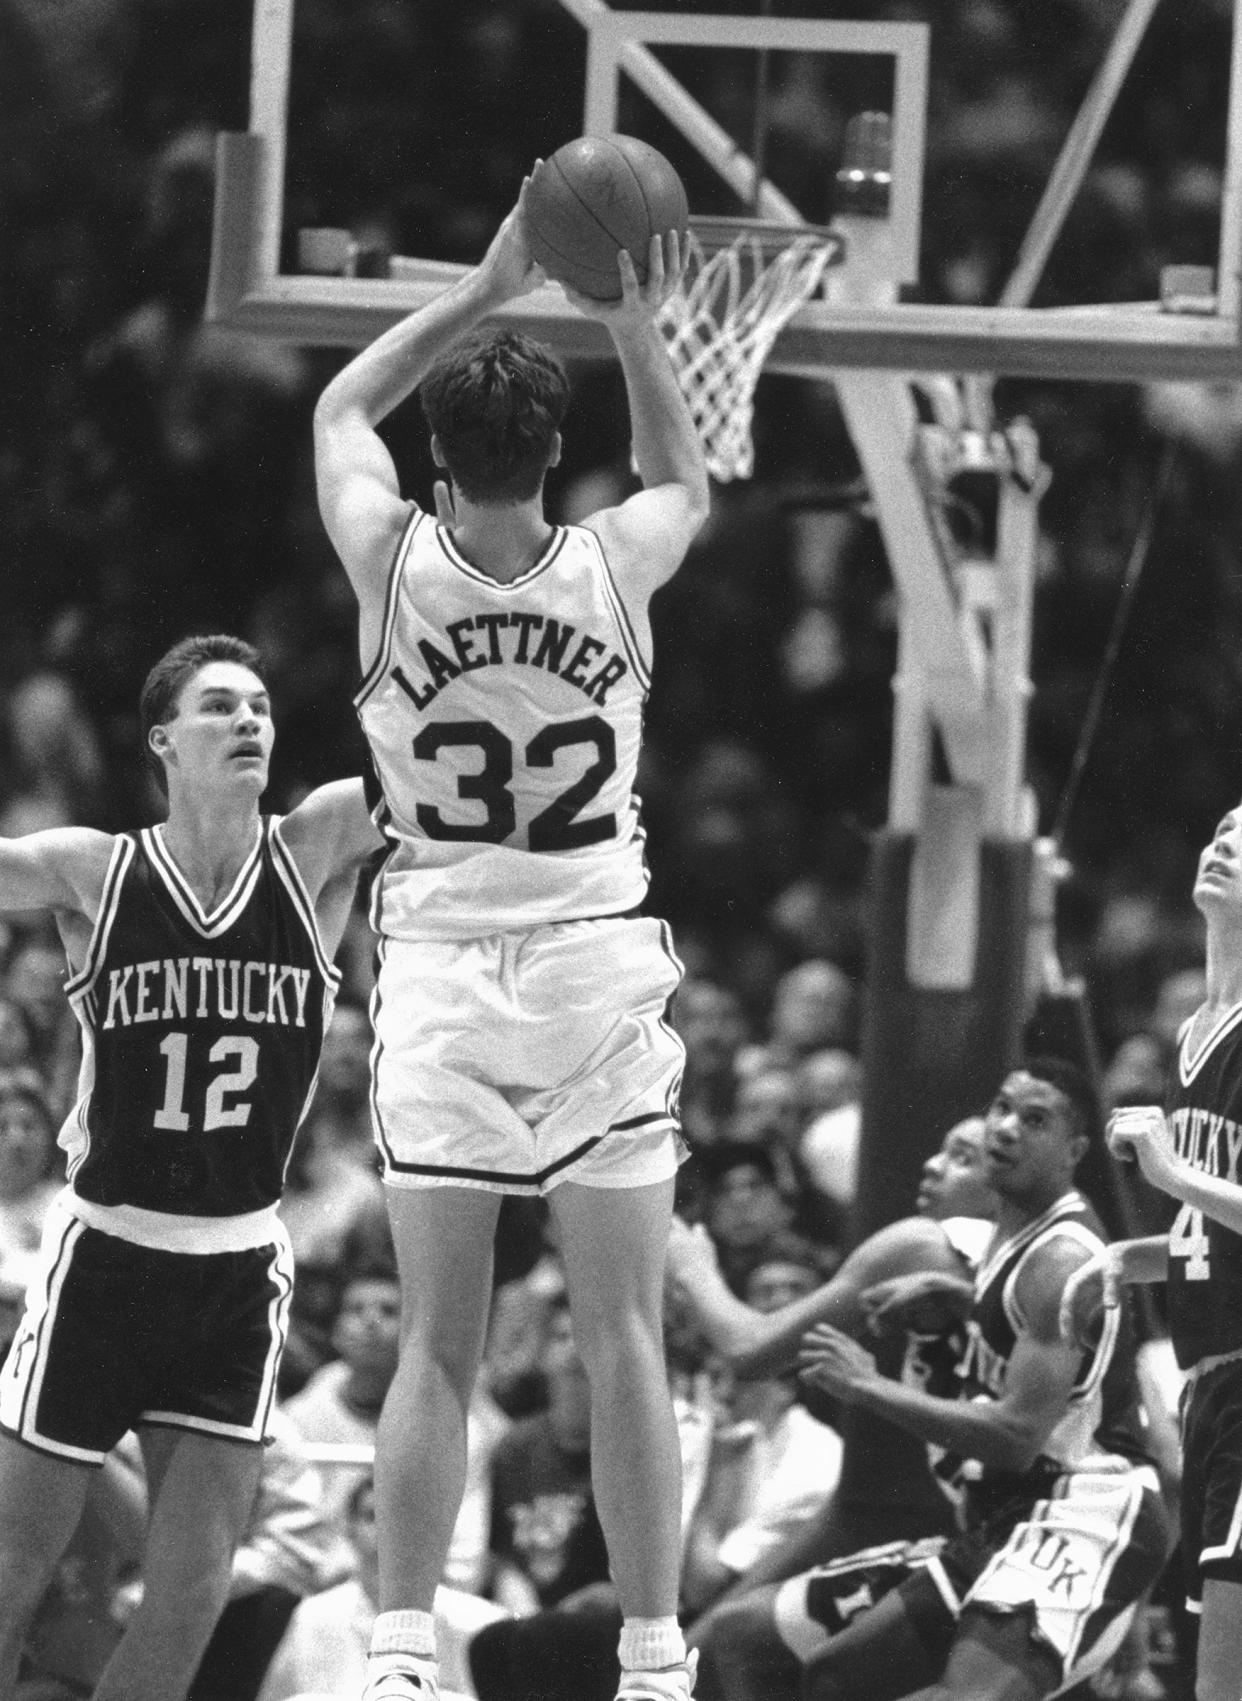 Duke star Christian Laettner gets off a last-second shot to defeat Kentucky in the NCAA Tournament in 1992.